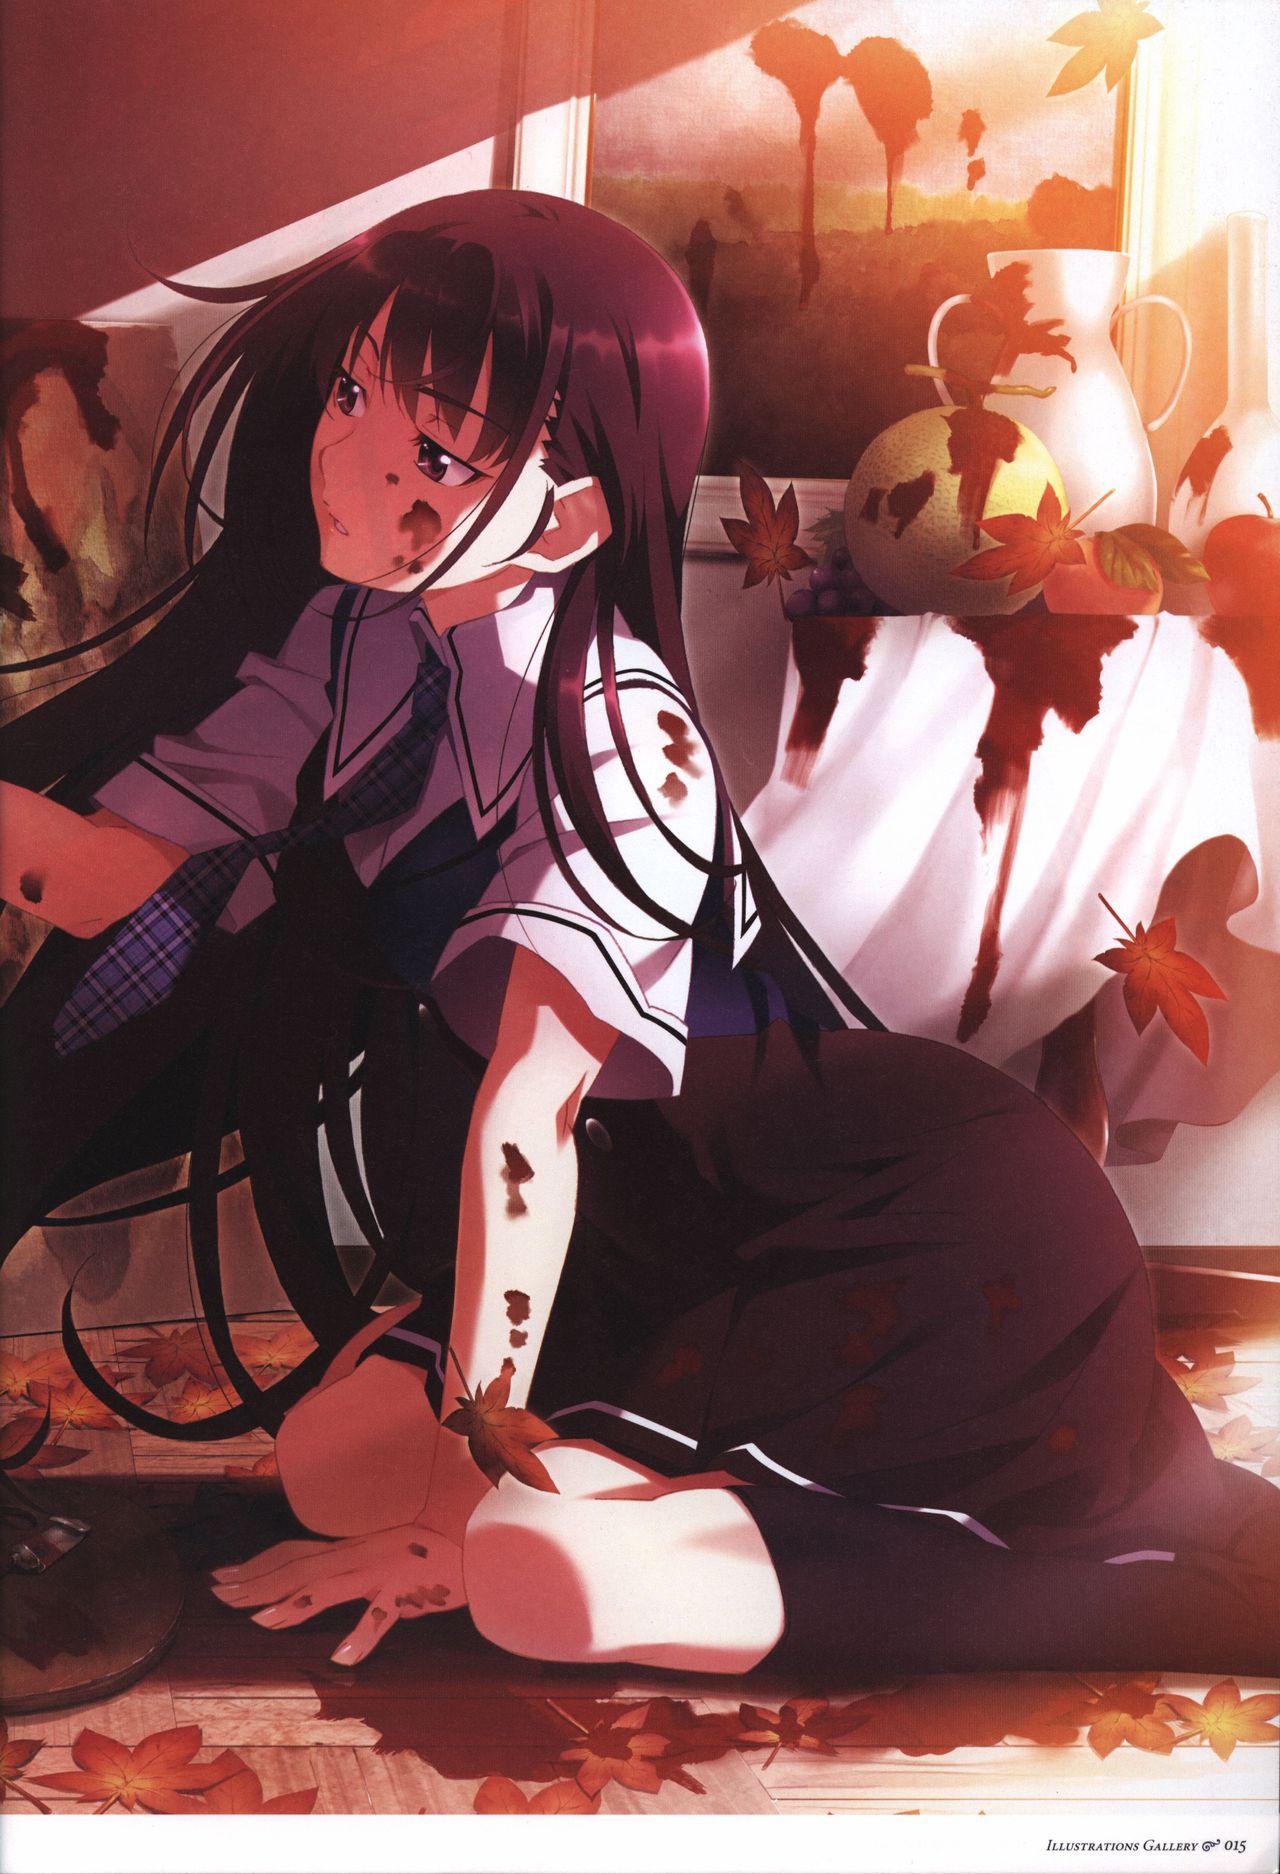 The Fruit of Grisaia Visual FanBook 15